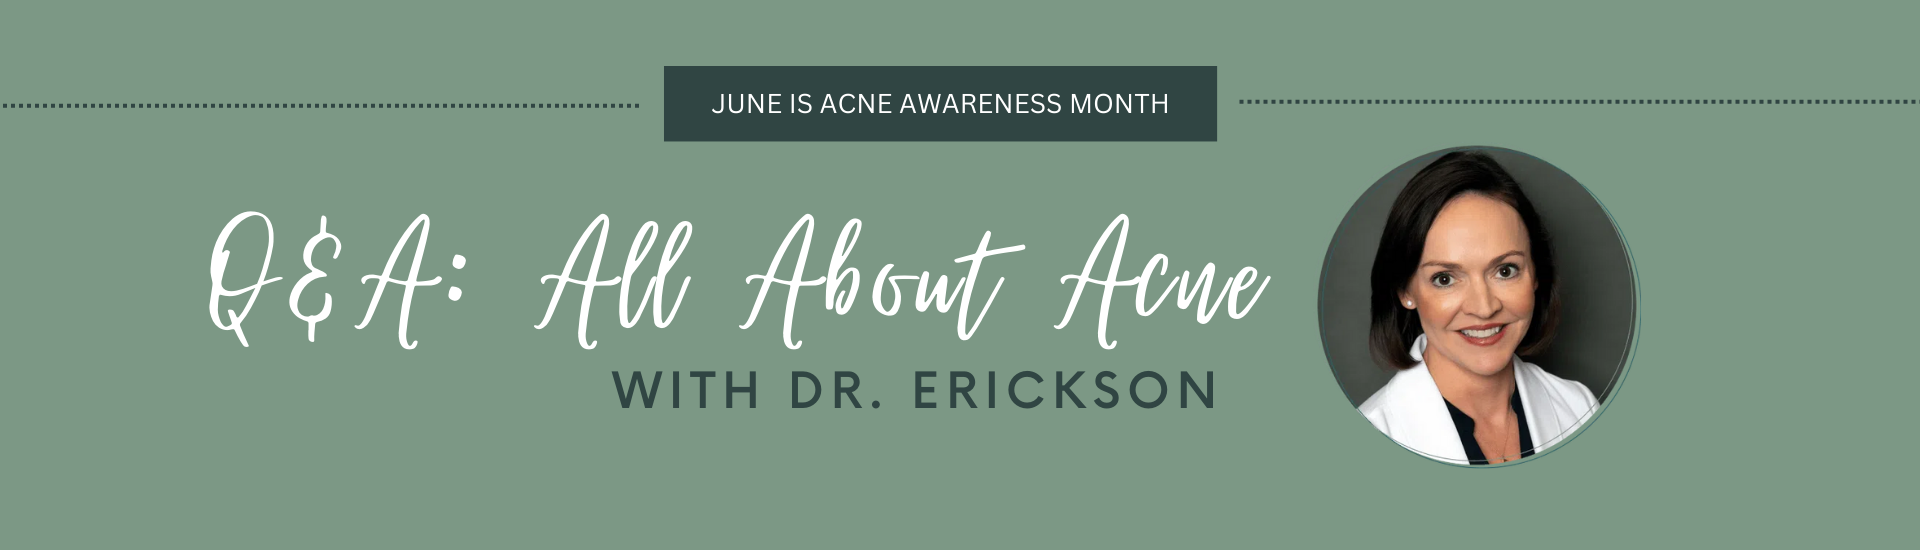 Q&A with Dr. Erickson about Acne